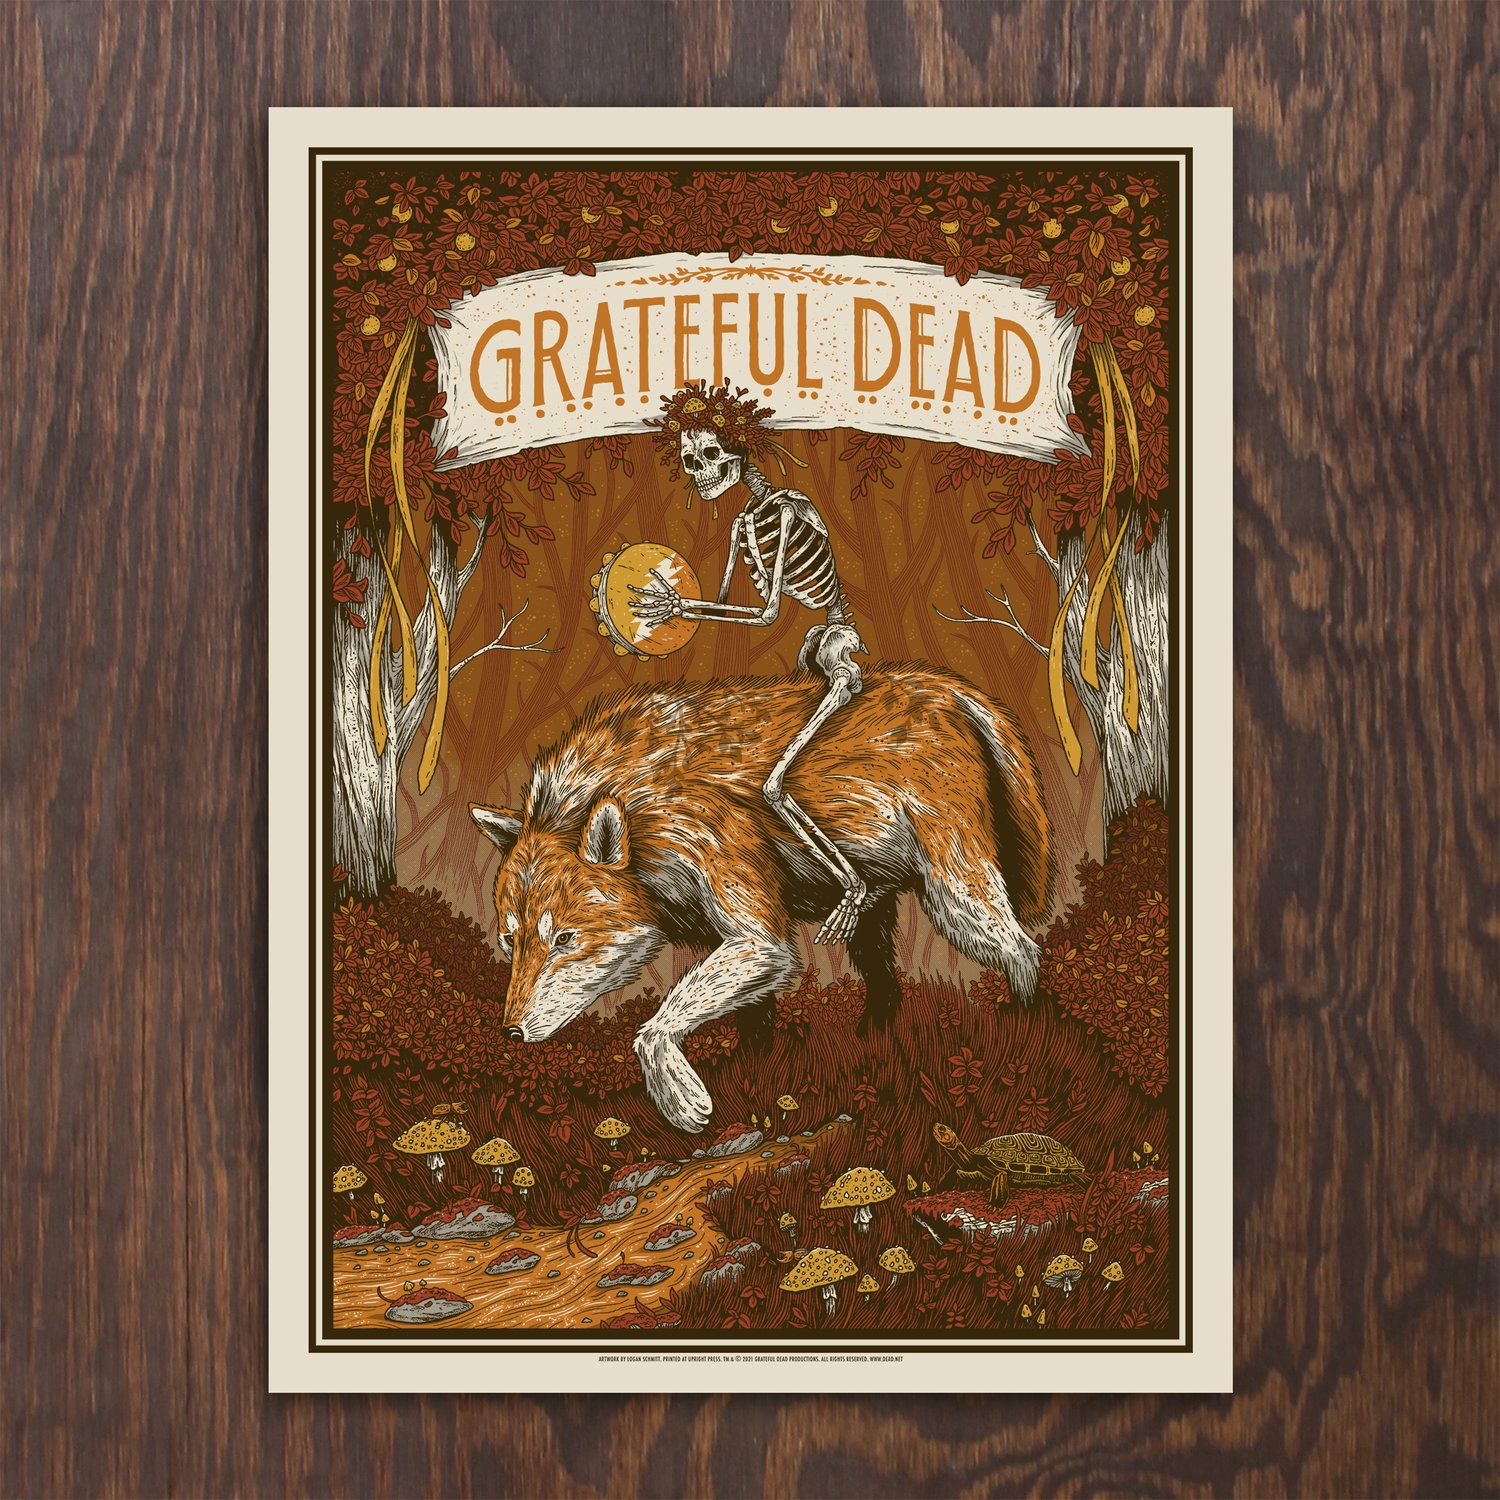 The Grateful Dead Skull And Roses Print – Poster Museum, 51% OFF